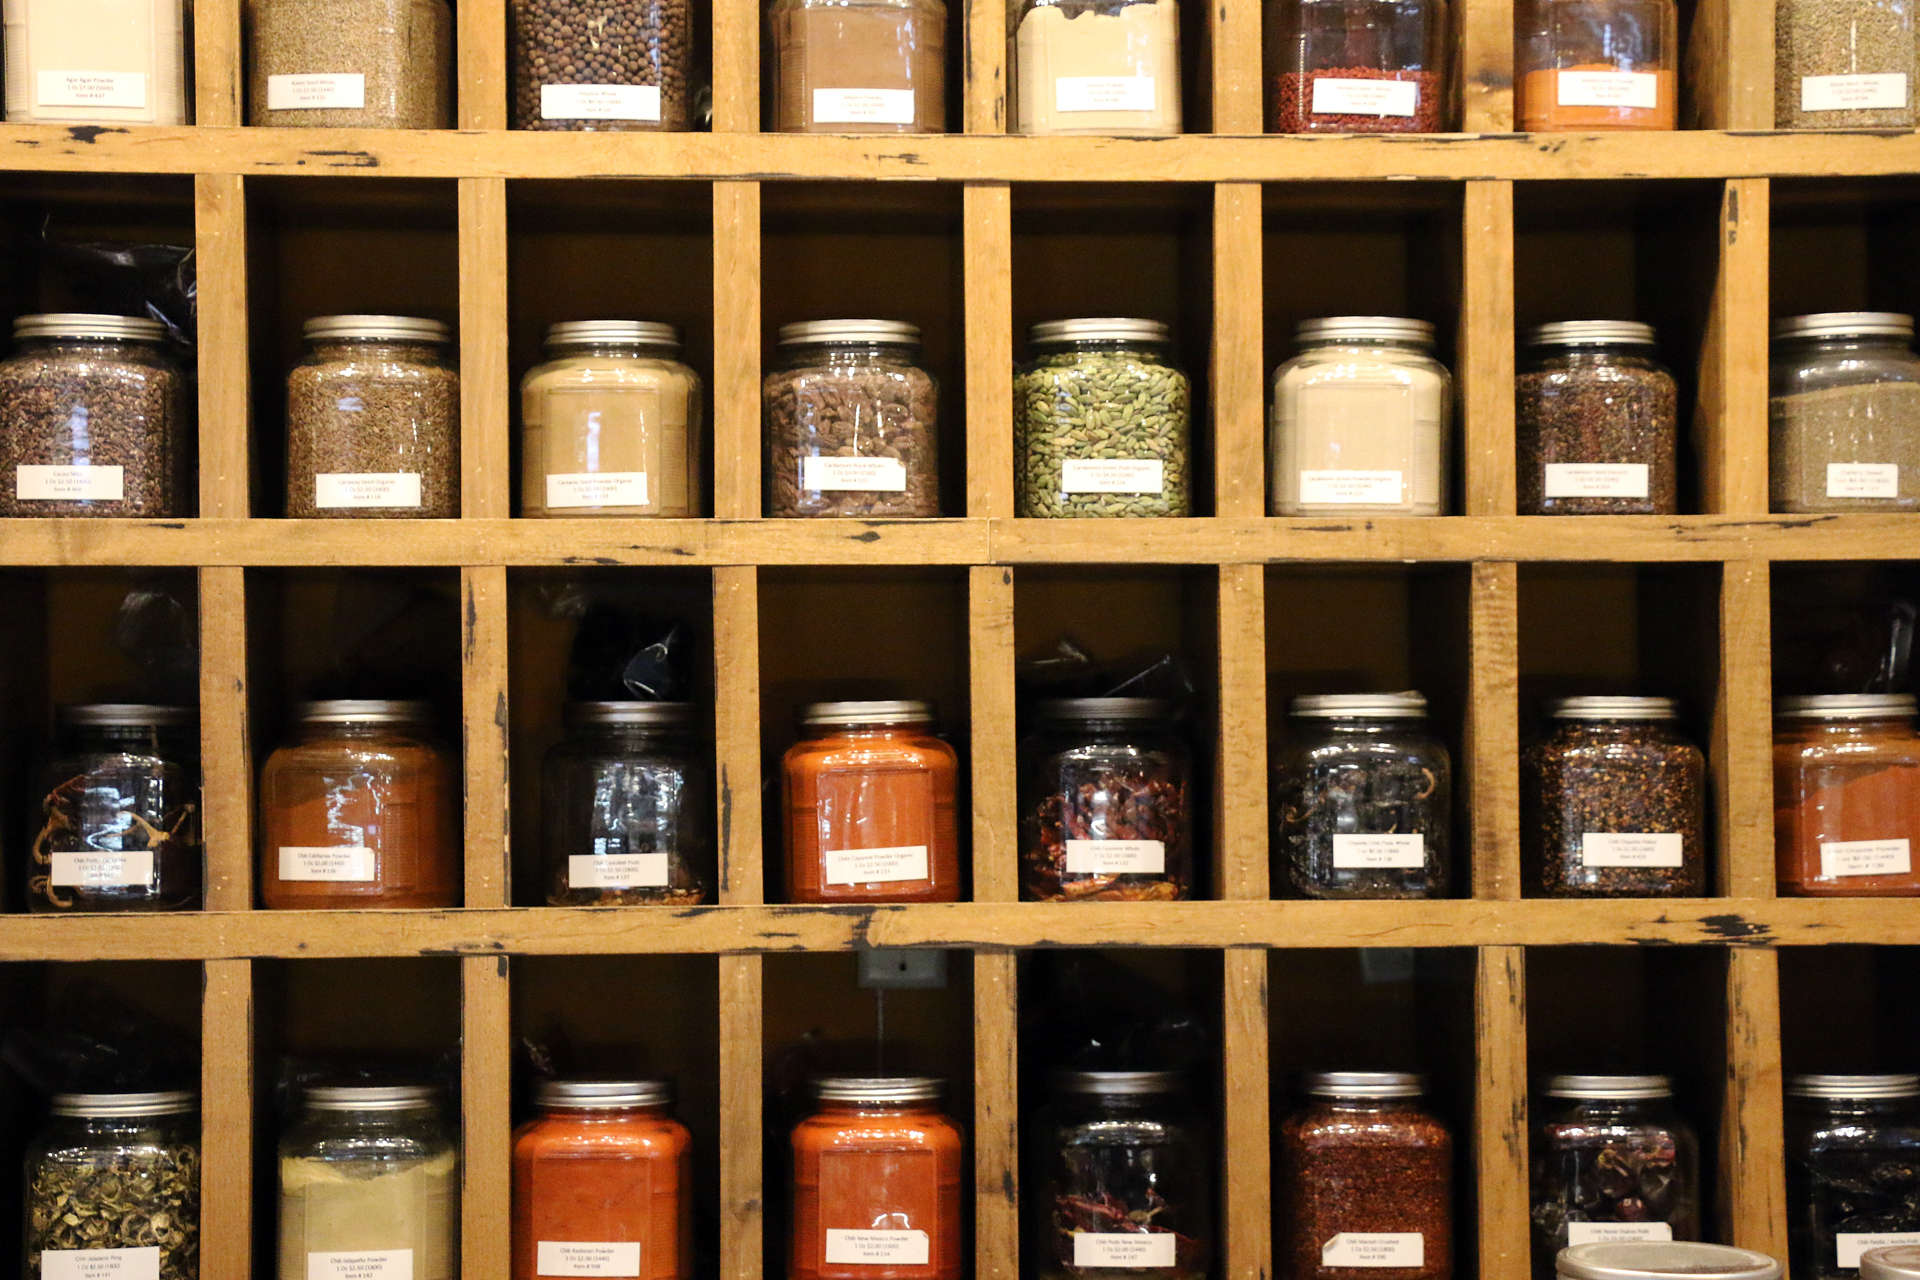 Rows and rows of spices at Whole Spice.